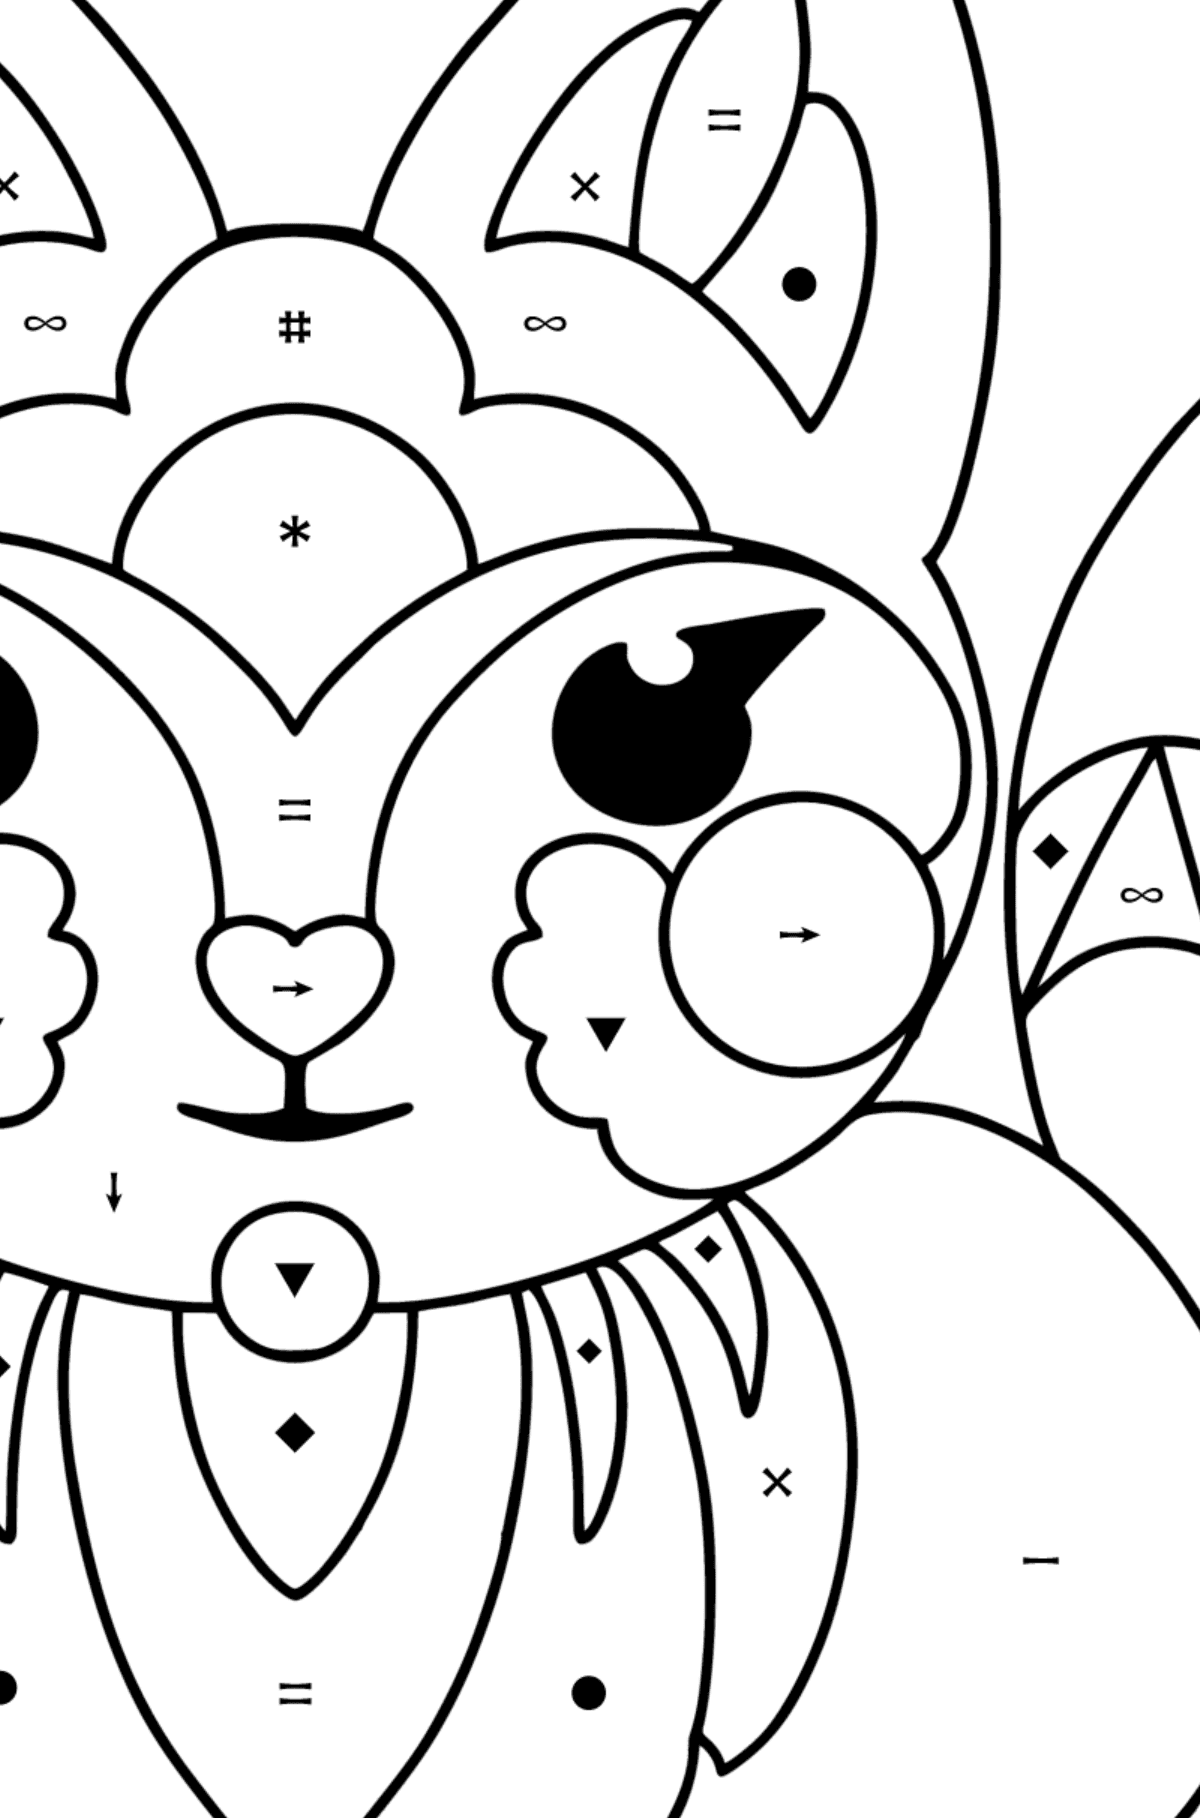 Anti stress Fox coloring page - Coloring by Symbols for Kids